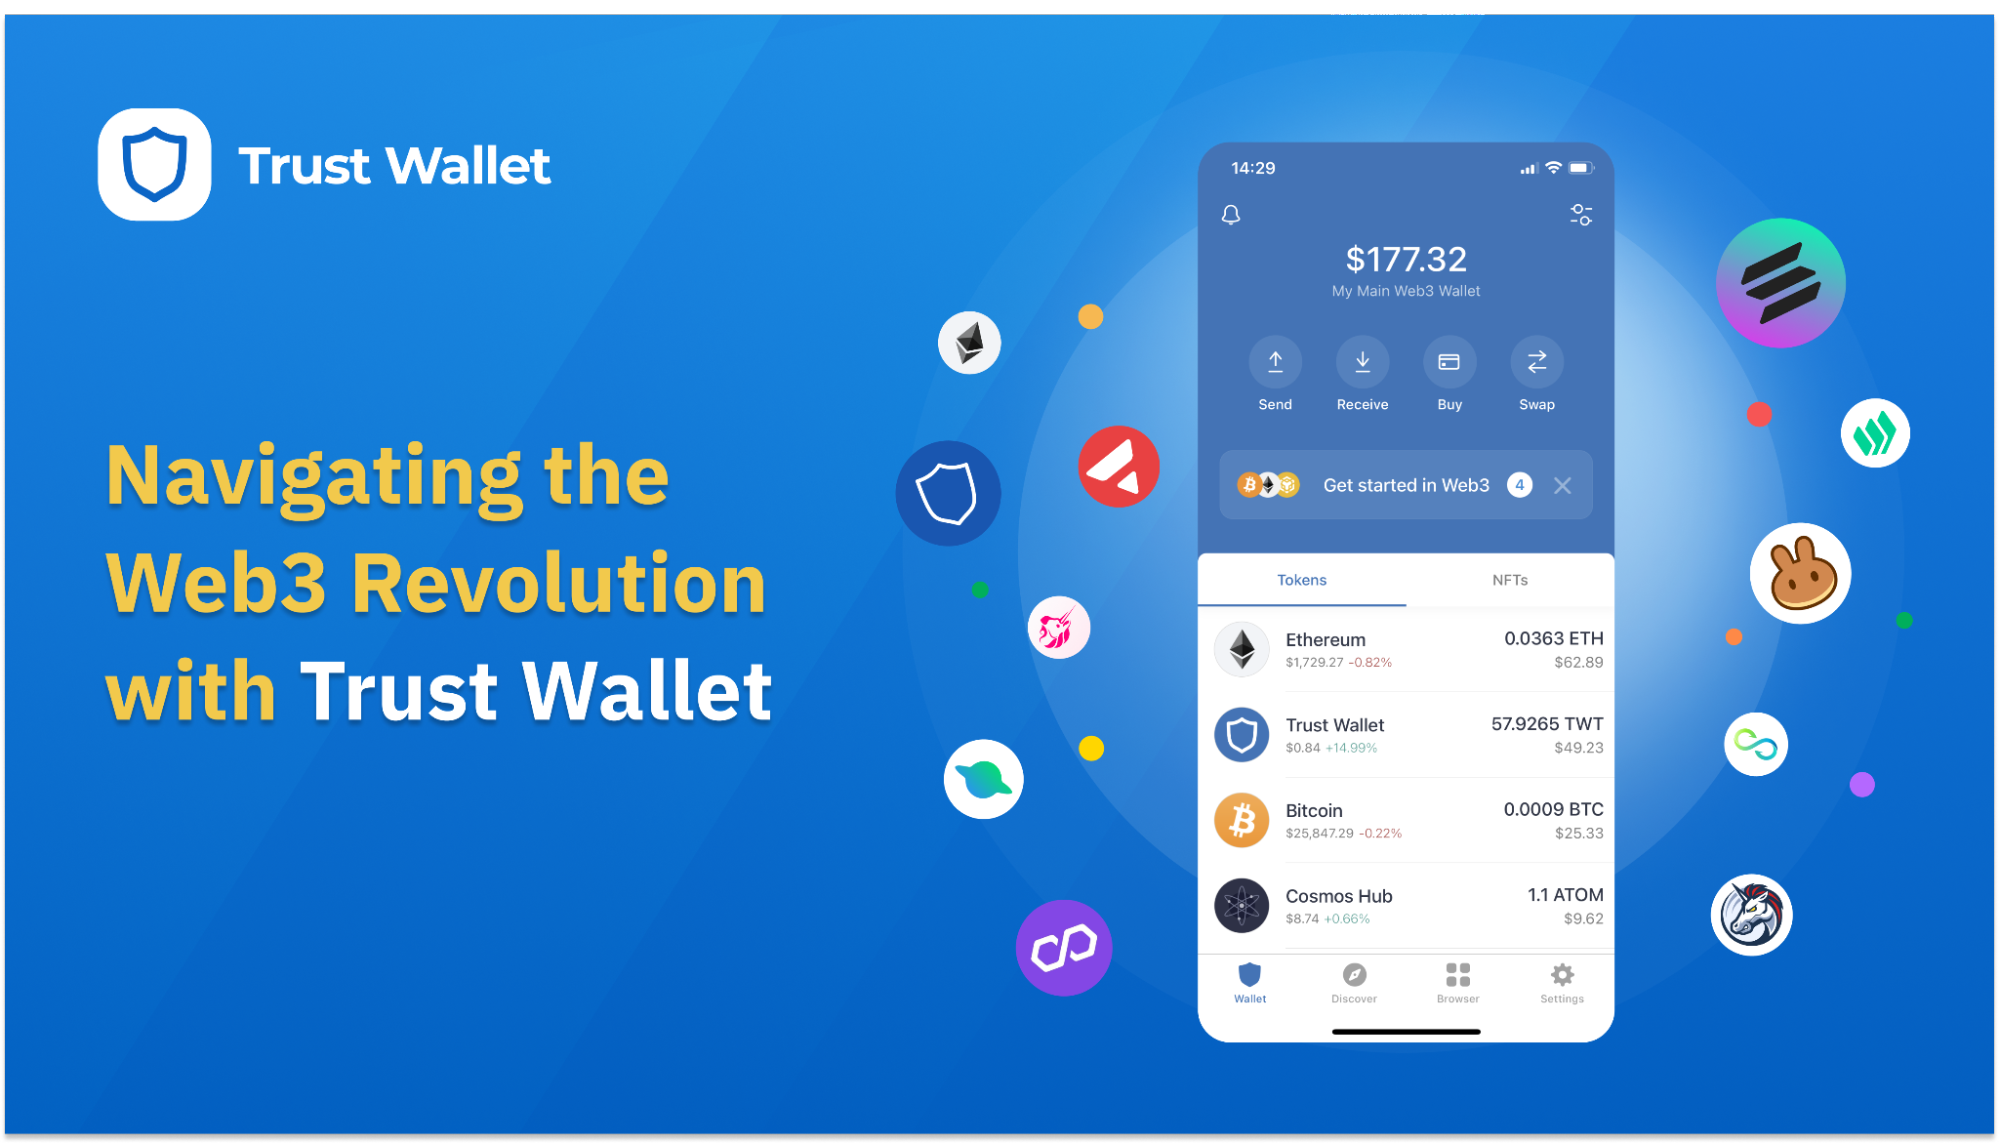 Navigating the Web3 Revolution with Trust Wallet